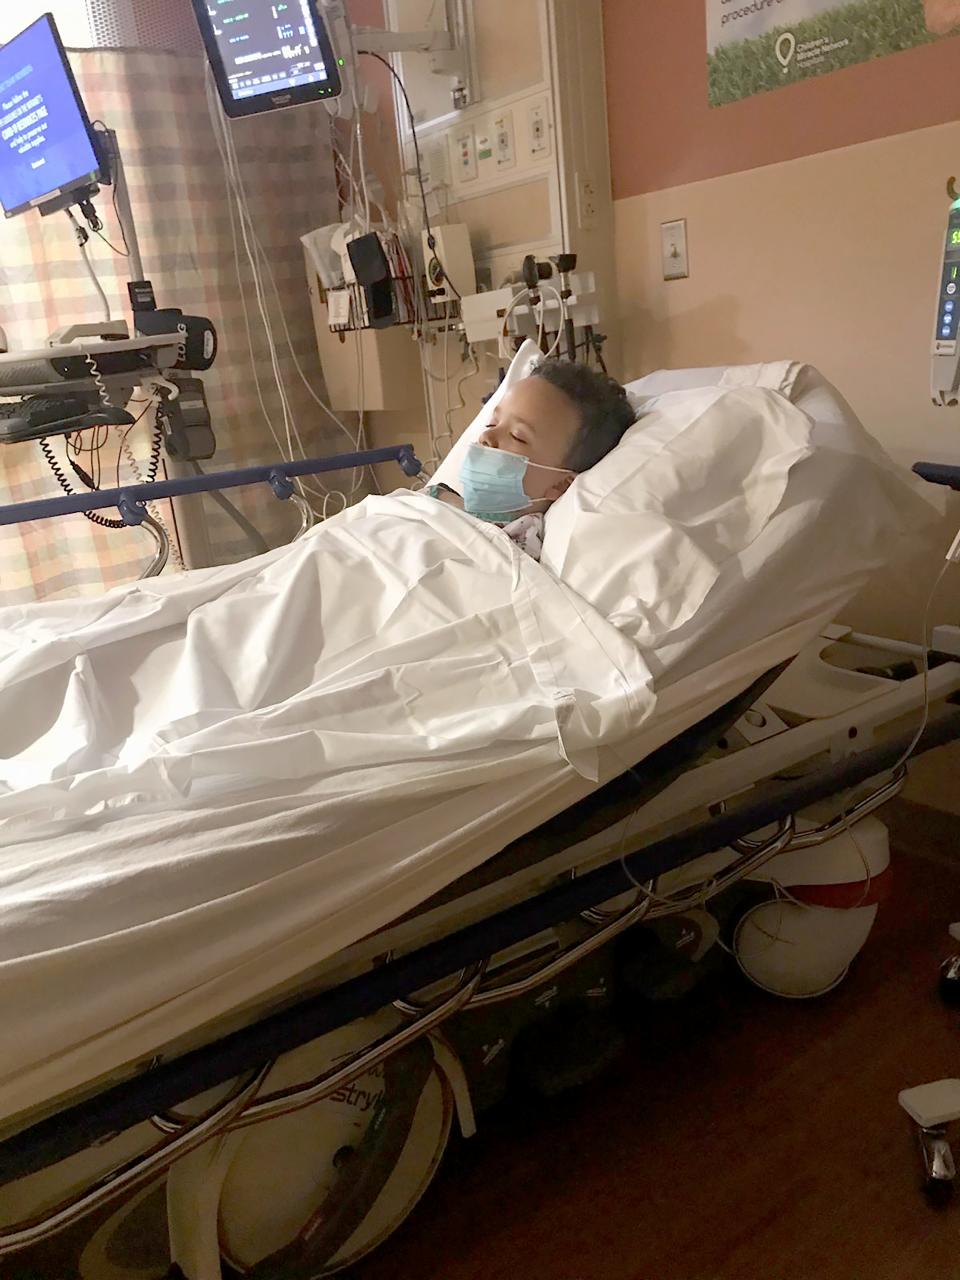 Levi Nobles, 7, of Shelby Township, was among the Michigan children hospitalized earlier in the pandemic with a post-COVID-19 condition called multisystem inflammatory syndrome-children. As of November 2021, it has sickened more than 5,000 U.S. children and killed 48. Levi recovered.